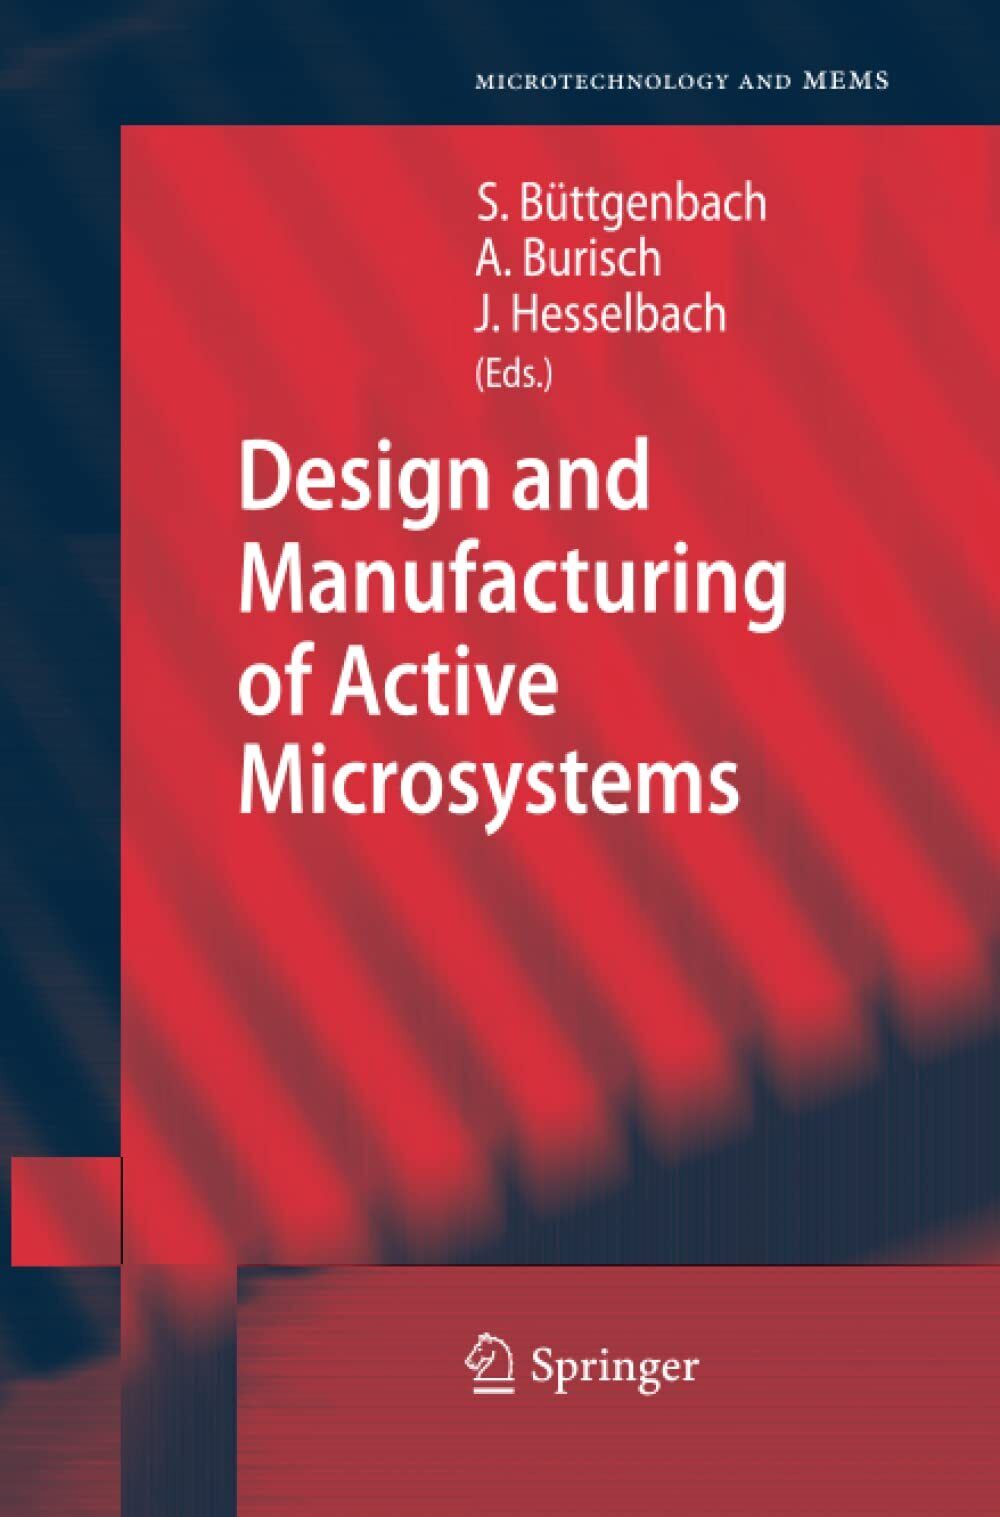 Design and Manufacturing of Active Microsystems - Stephanus B?ttgenbach - 2014